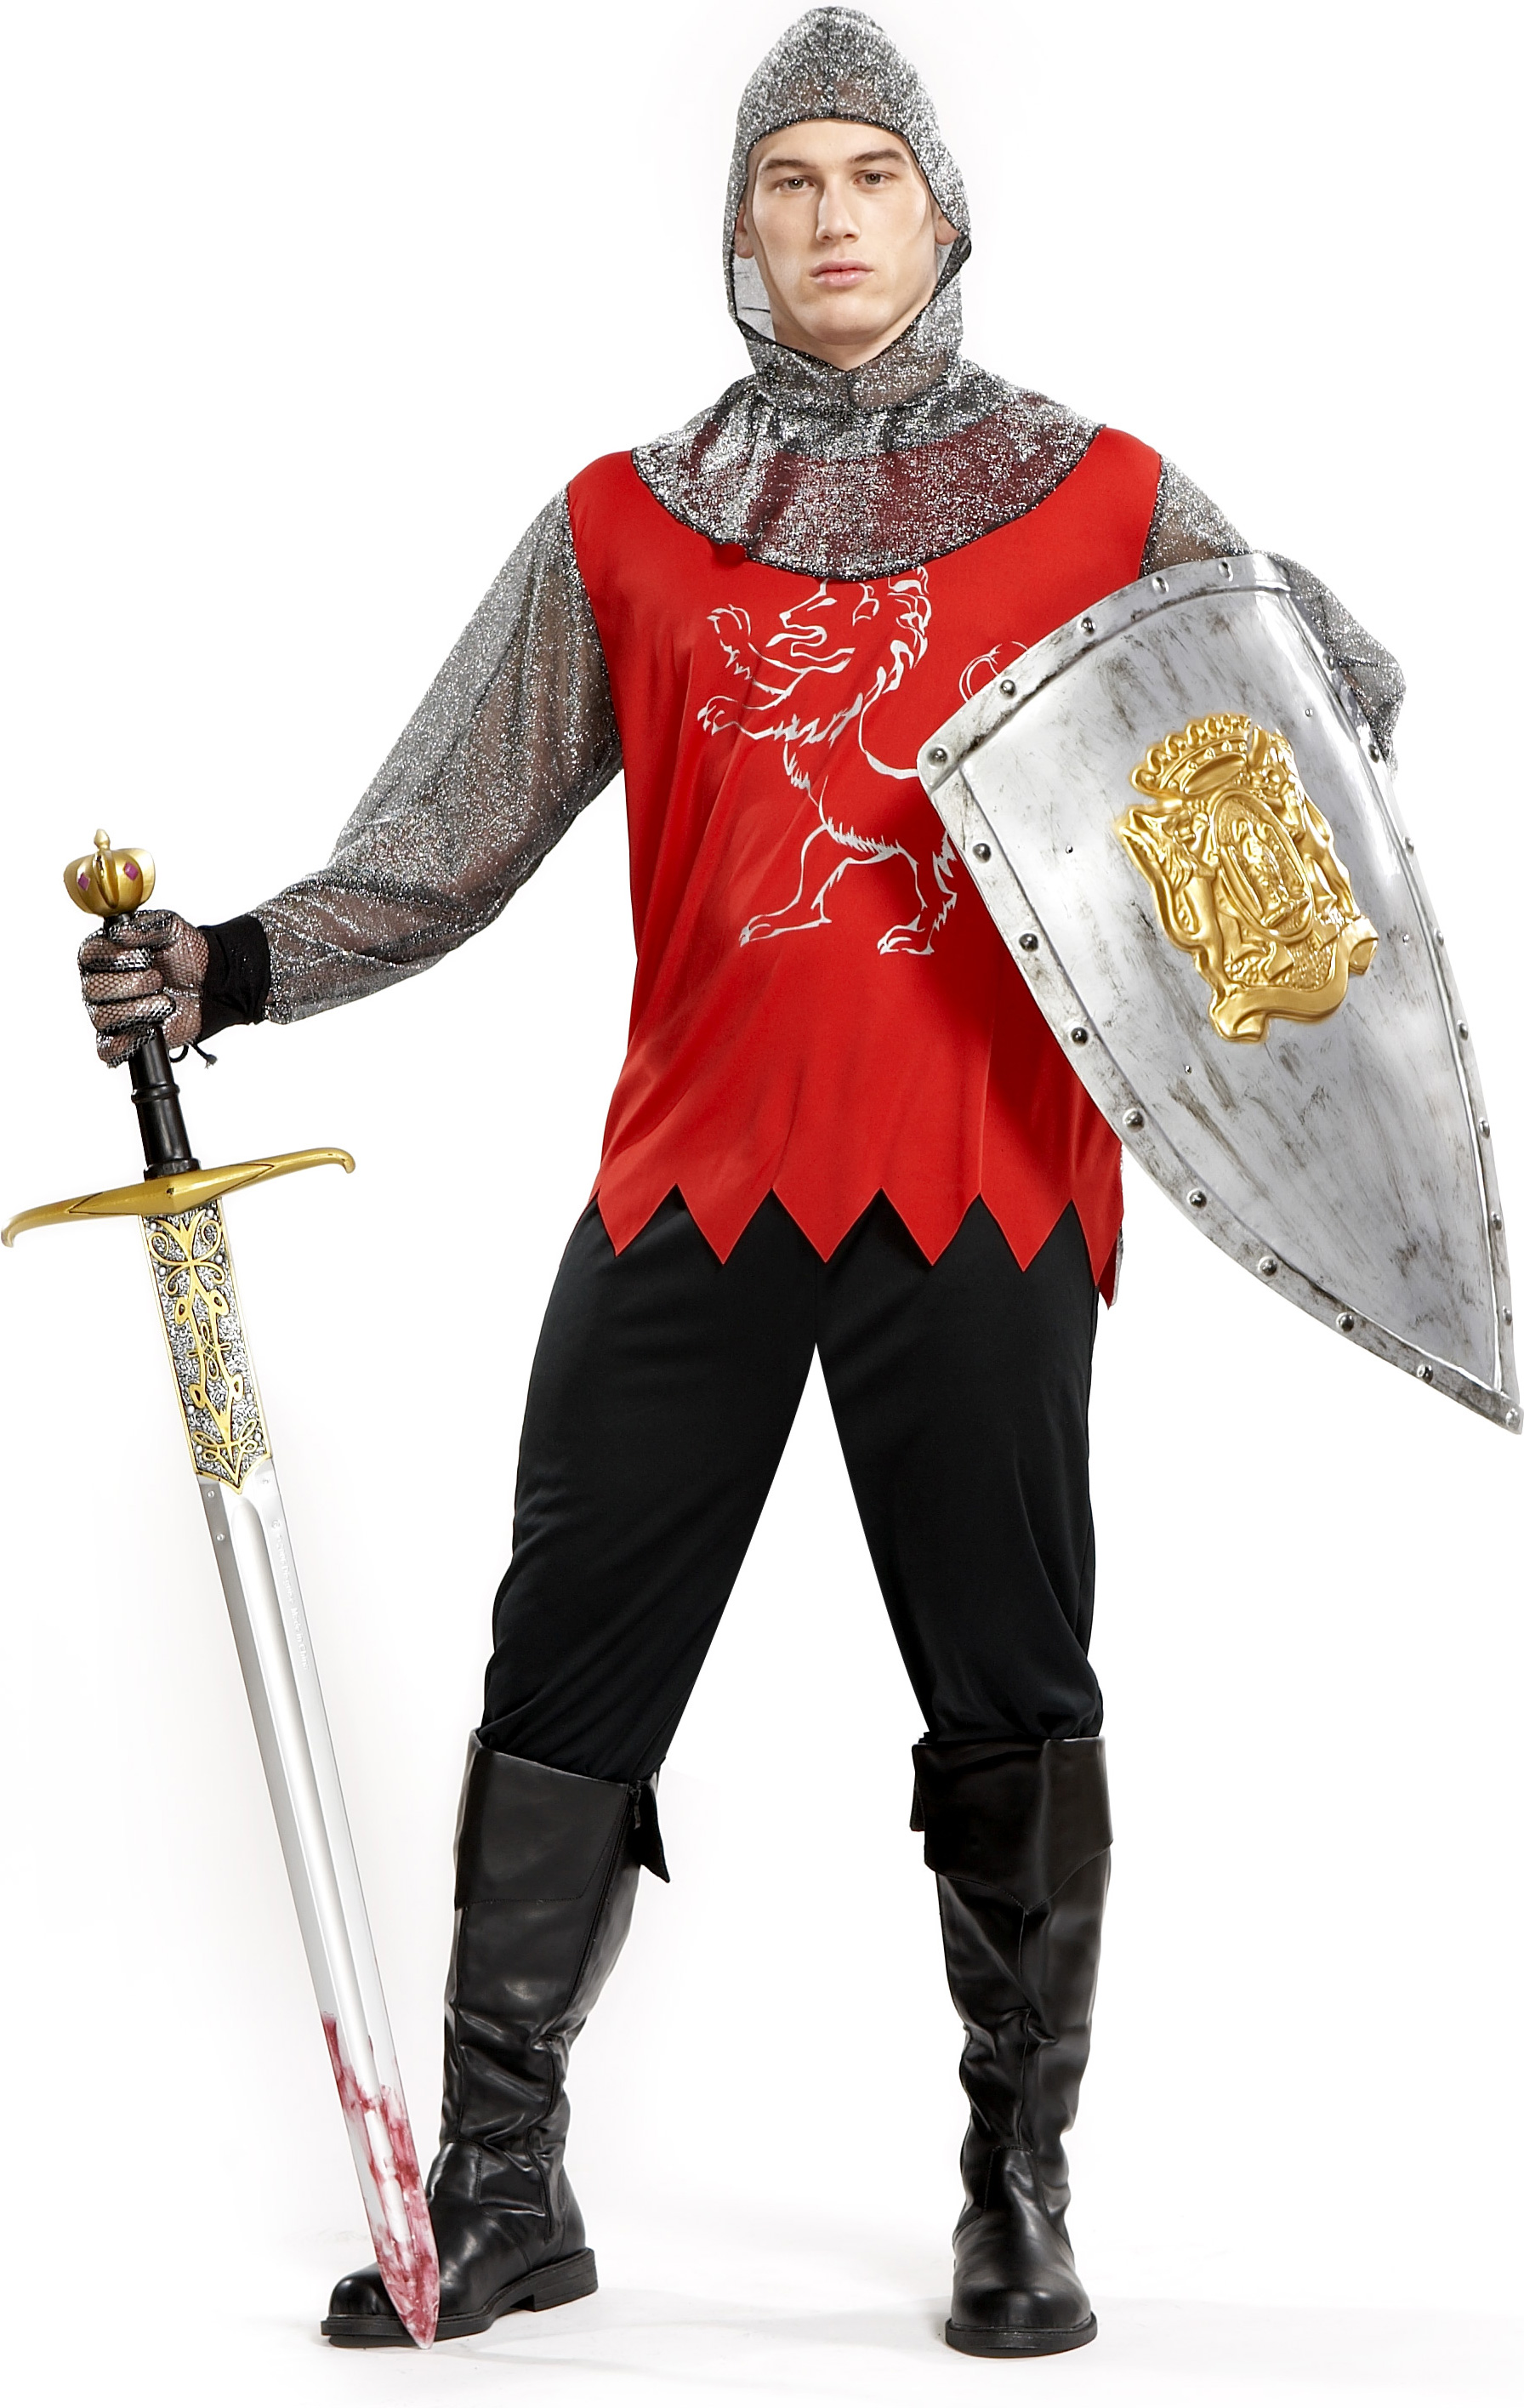 AMC Men's Medieval Knight Adult Costume - One-Size (42-48)